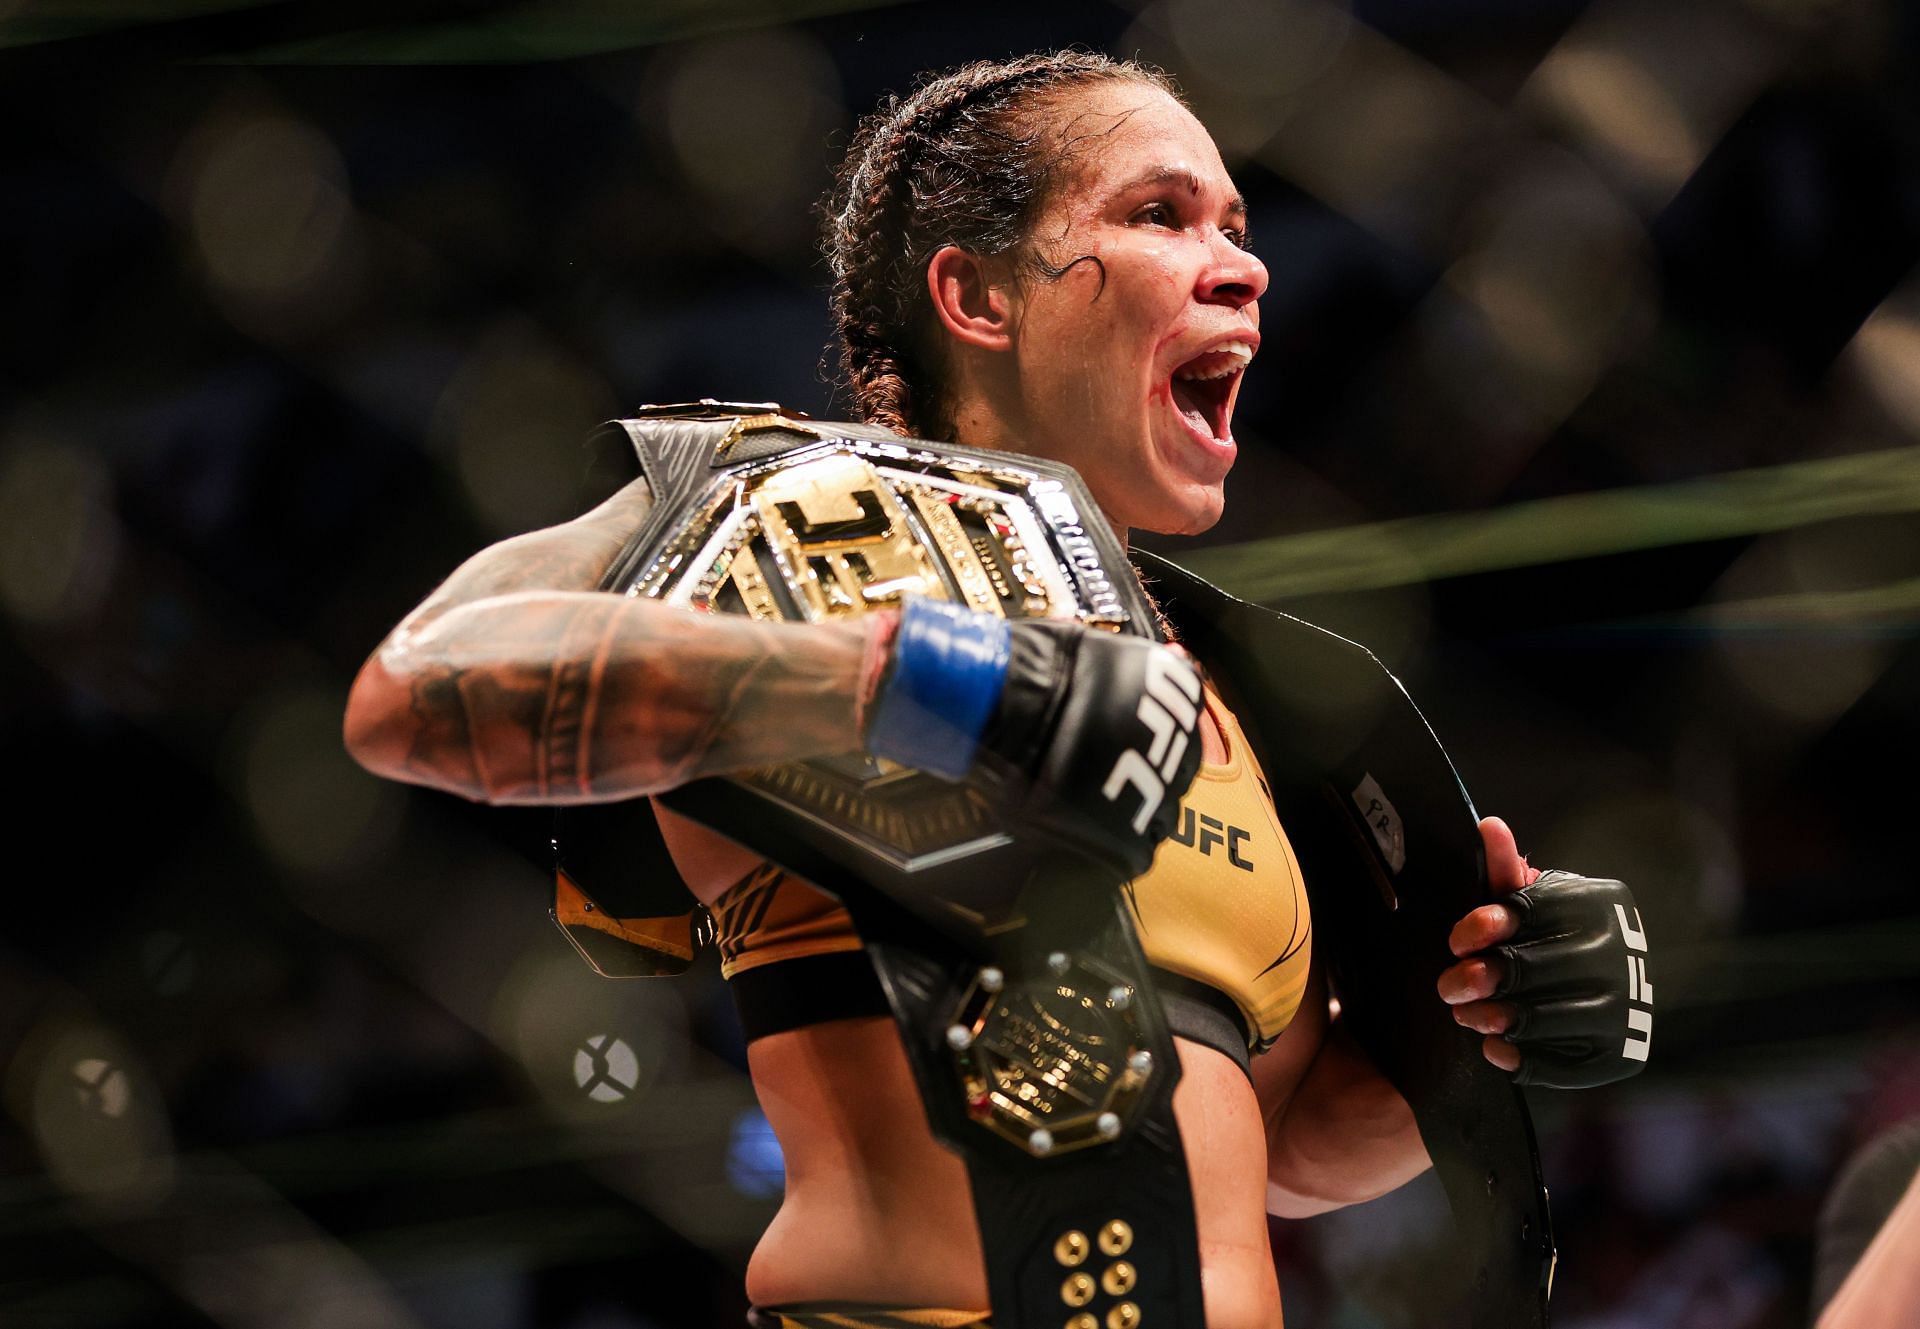 Can Amanda Nunes add to her legend by defeating Irene Aldana this weekend?